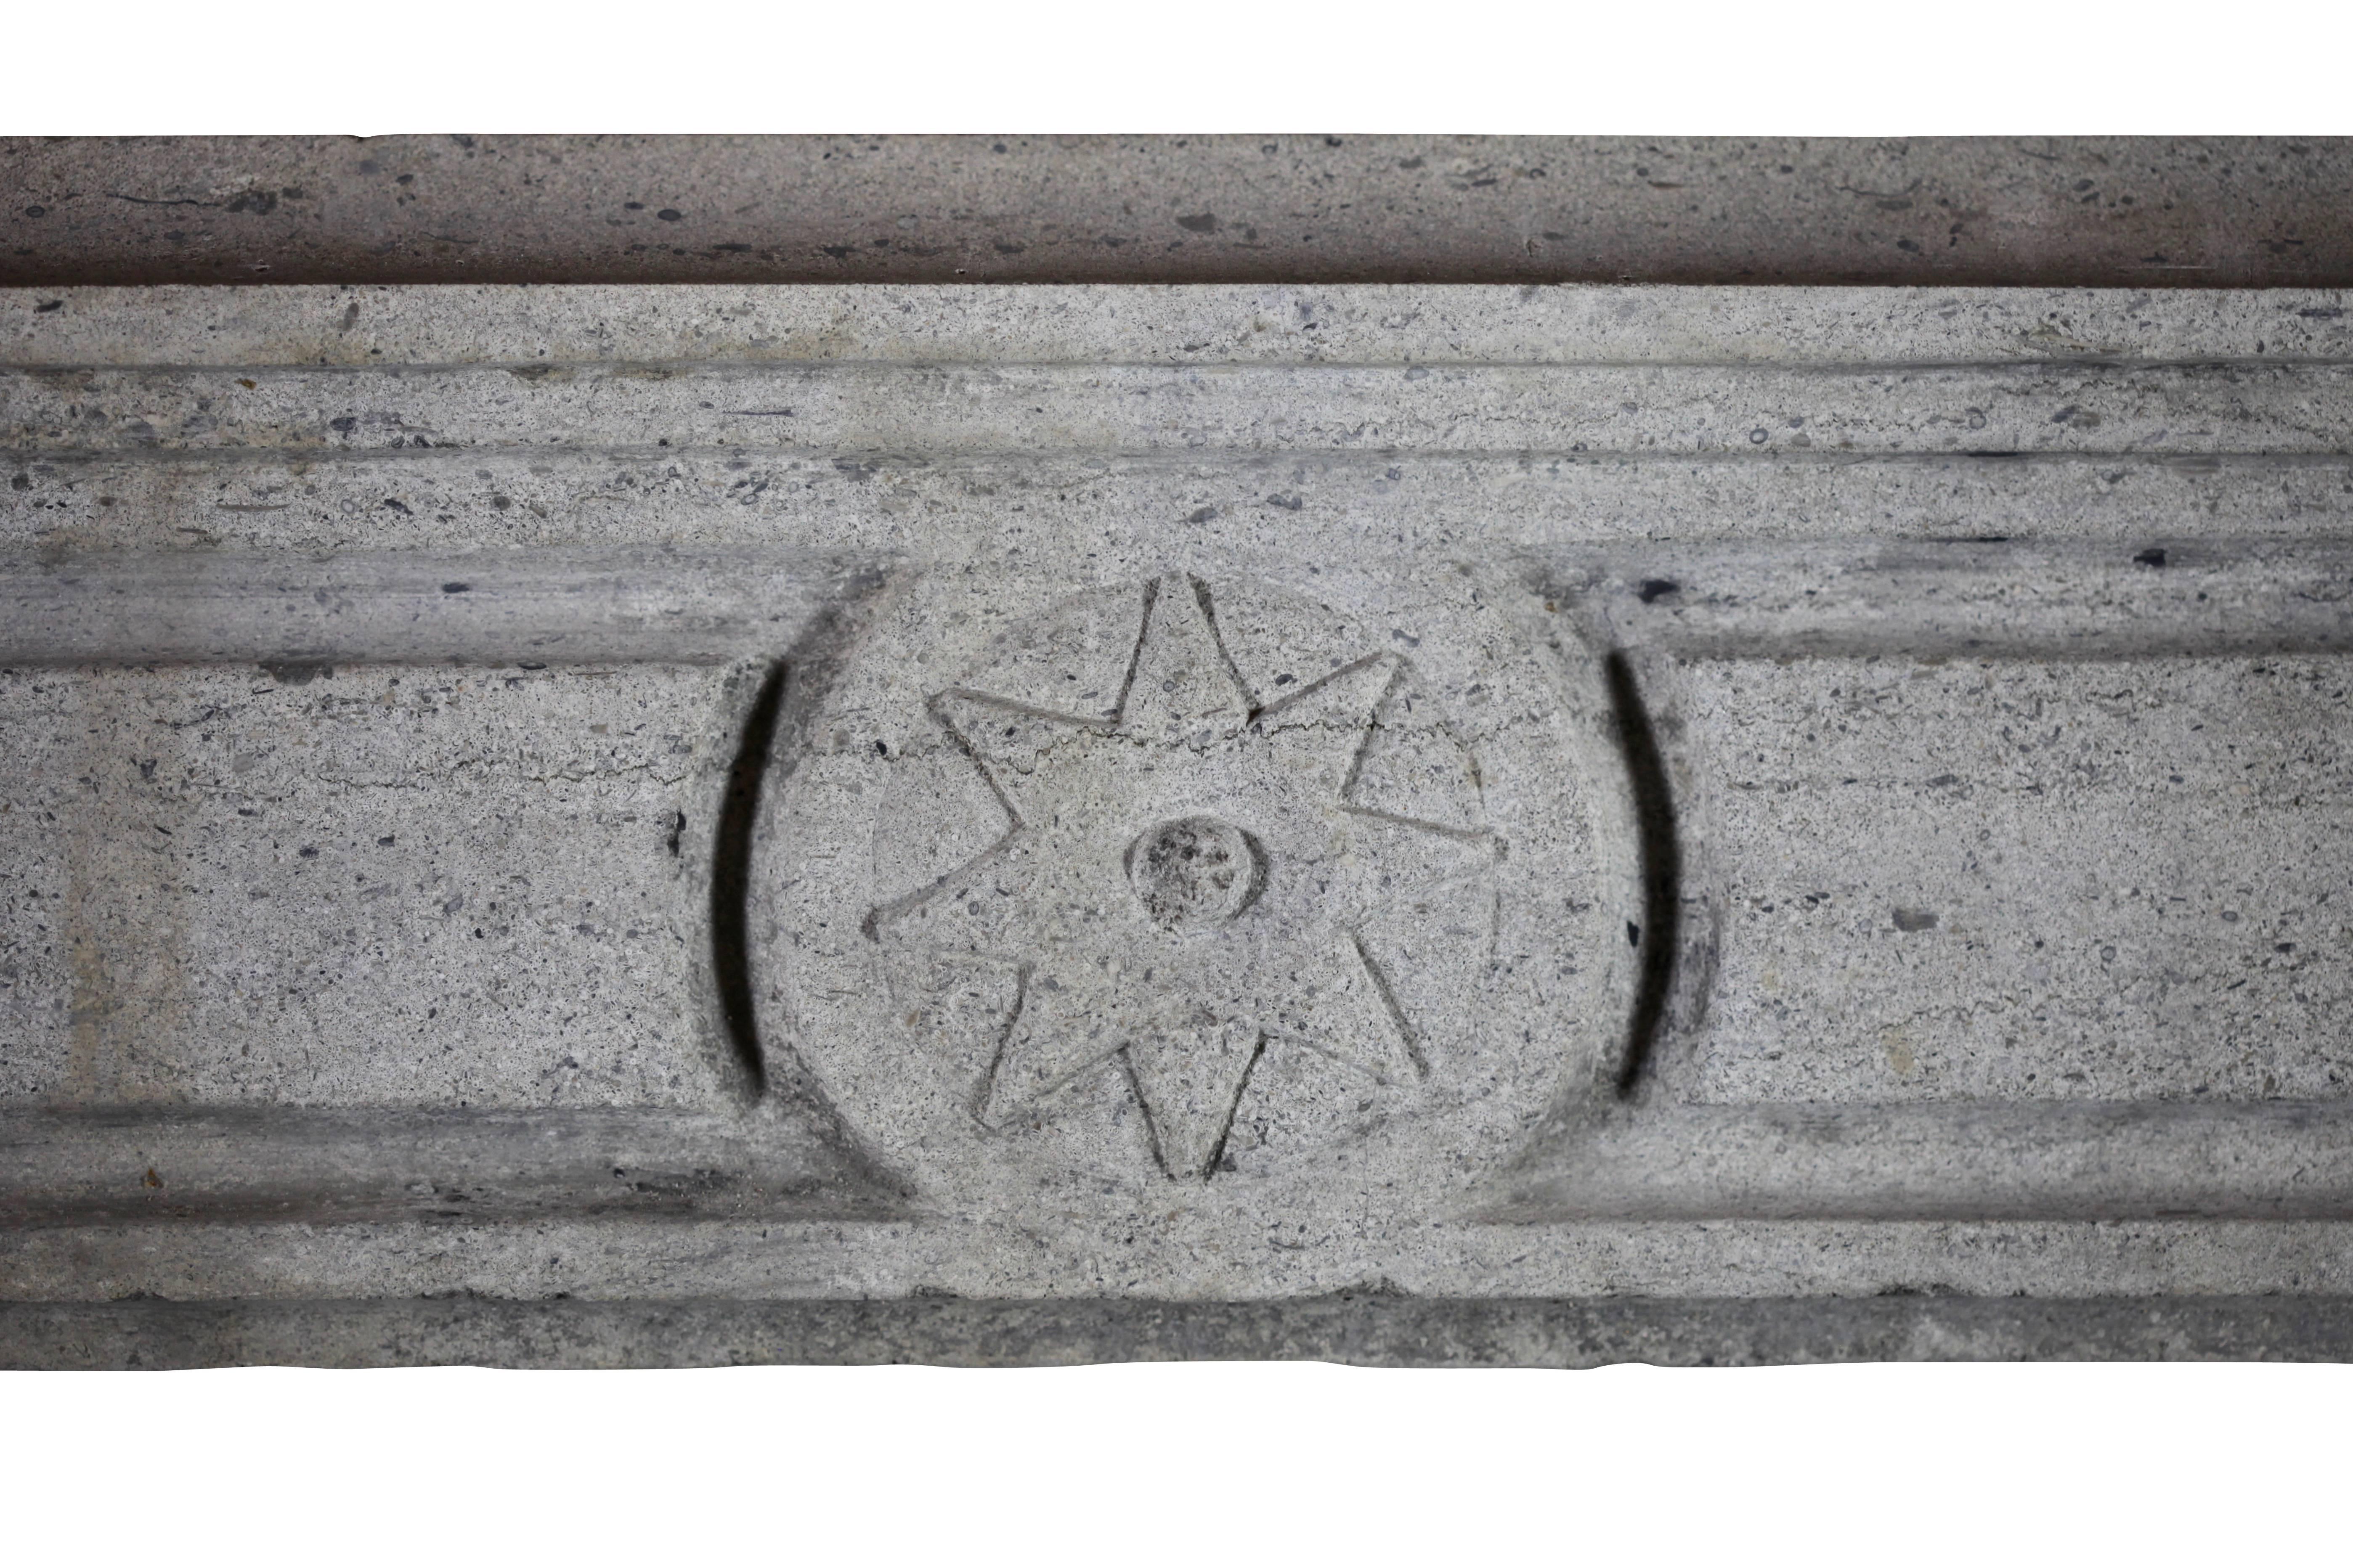 This classic straight fireplace surround in bicolor grey hard stone from the Burgundy region with star as a central motive has a country, rustic influence.
Measures:
155.5 cm EW 61.22".
112.5 cm EH 44.29".
134.5 cm IW 52.95".
95